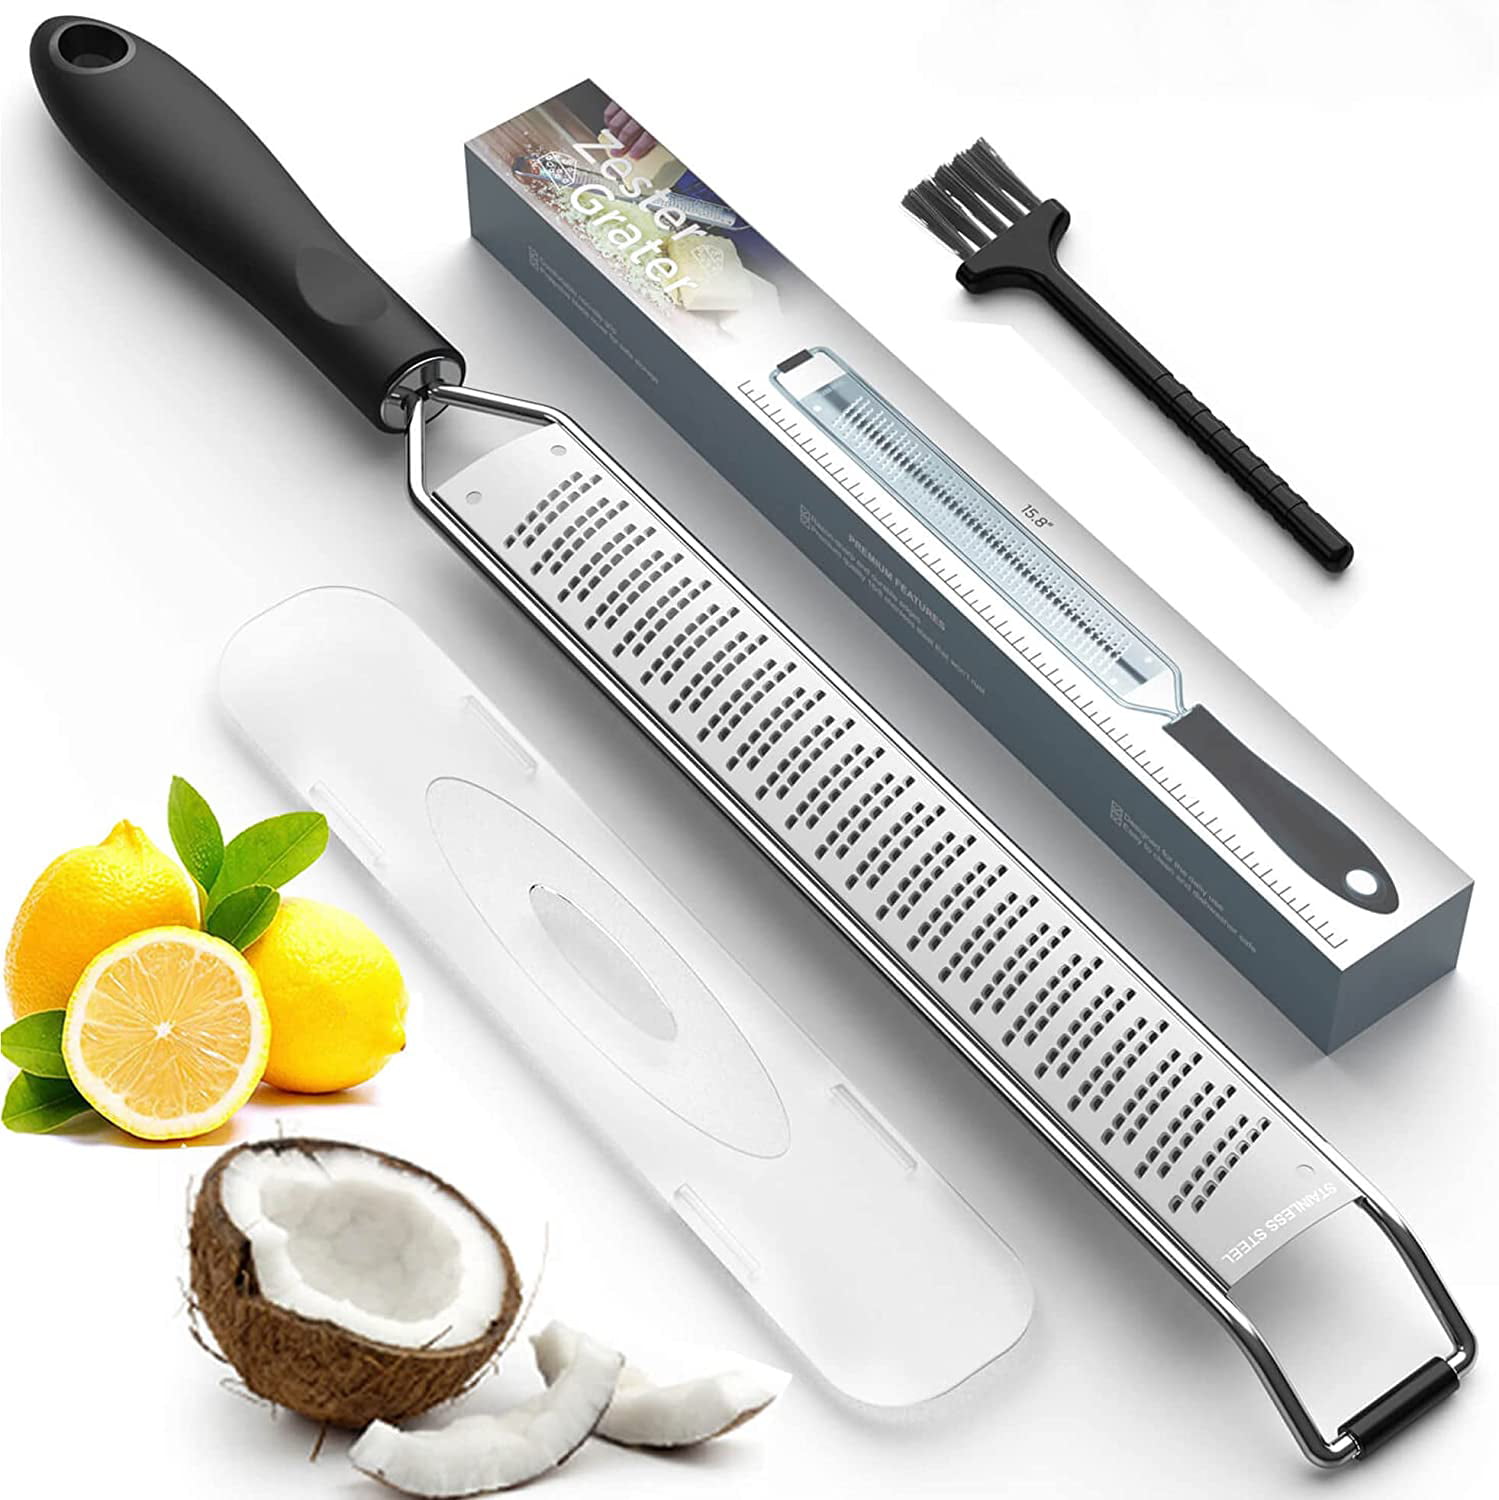 8 Inch Stainless Steel Cheese Grater Tools Chocolate Lemon Zester us